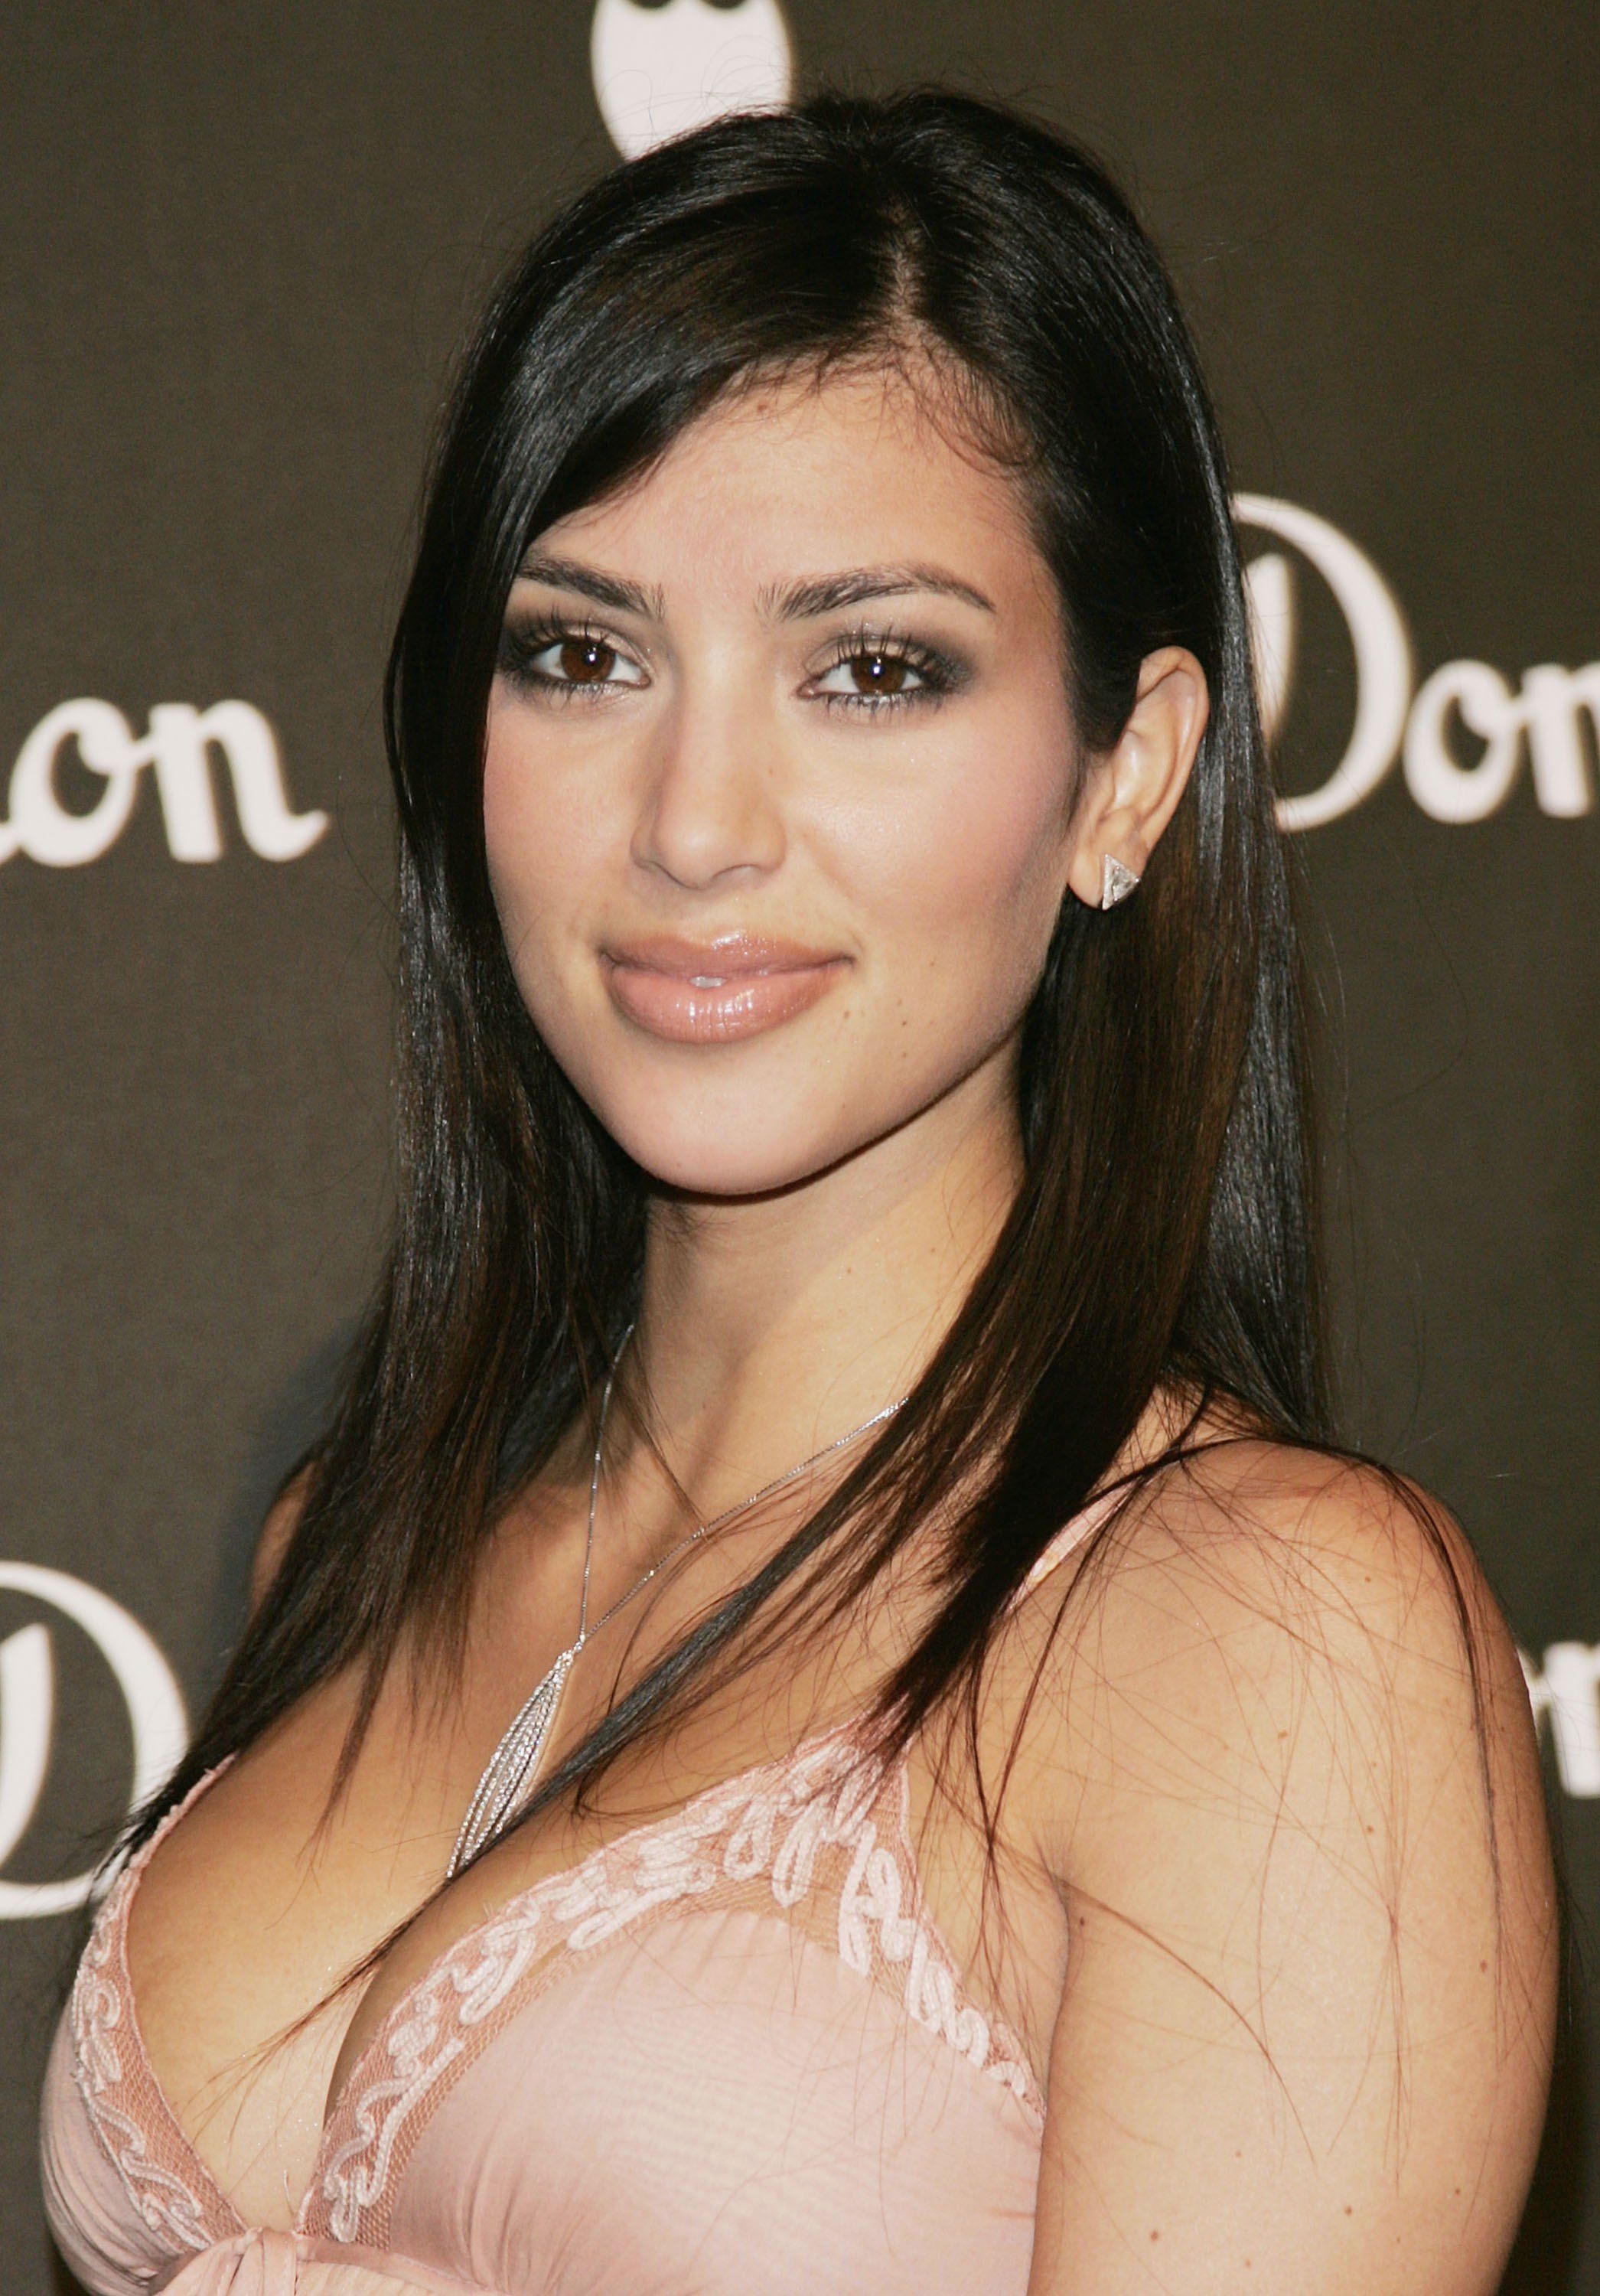 Reality star Kim Kardashian arriving at the International Launch of Dom Perignon Rose Vintage 1996 Champagne on June 2, 2006 in Beverly Hills. | Photo: Getty Images